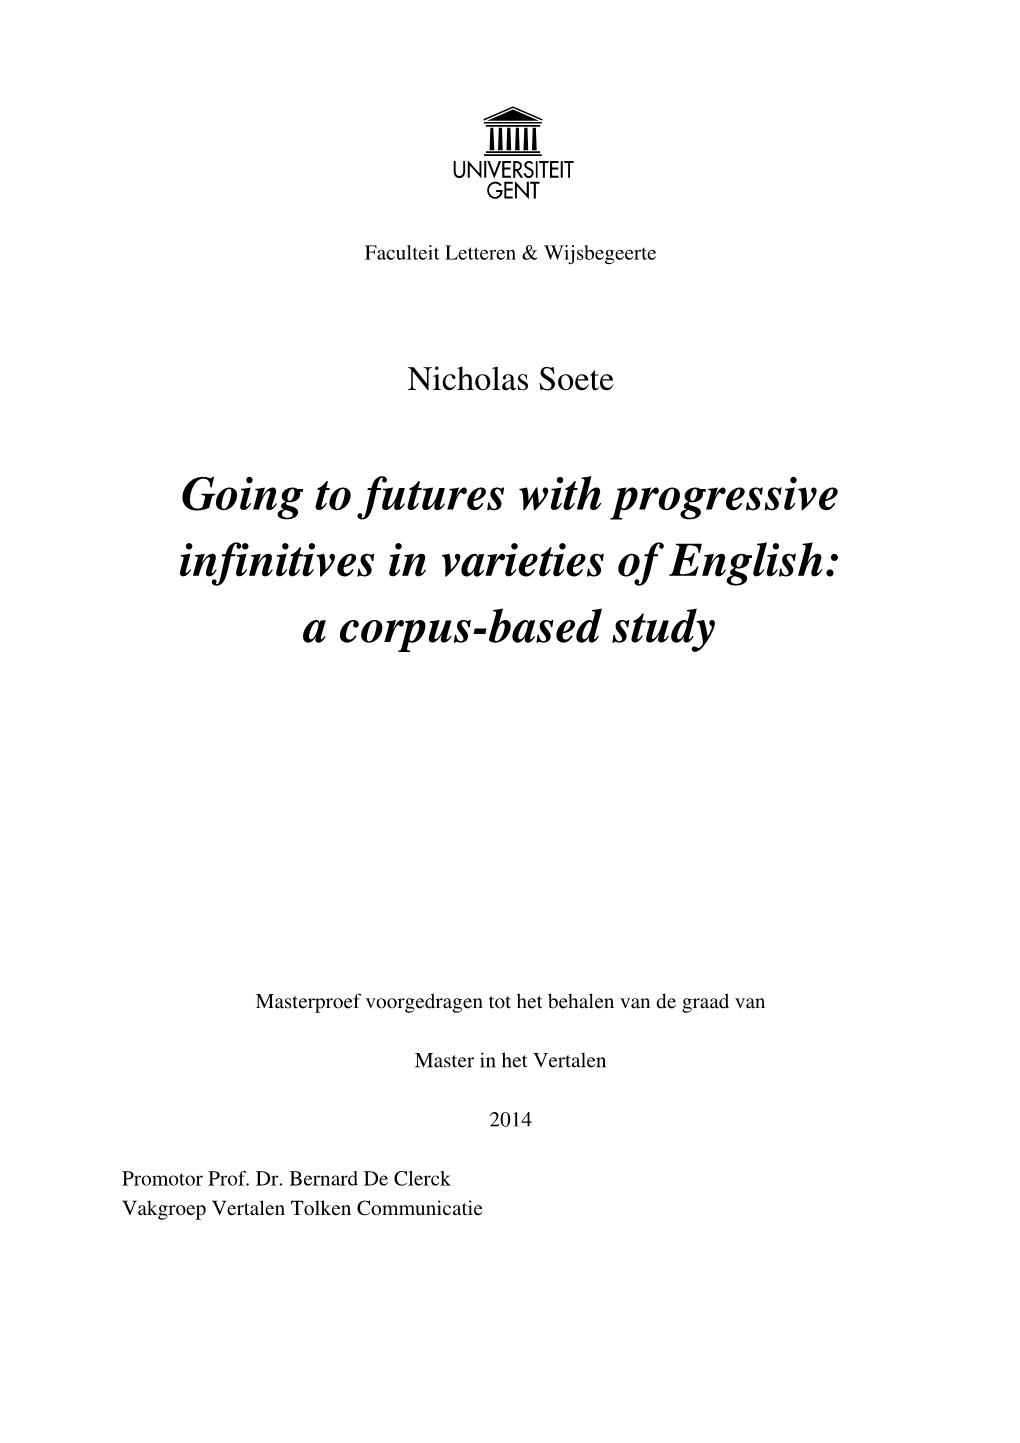 Going to Futures with Progressive Infinitives in Varieties of English: a Corpus-Based Study